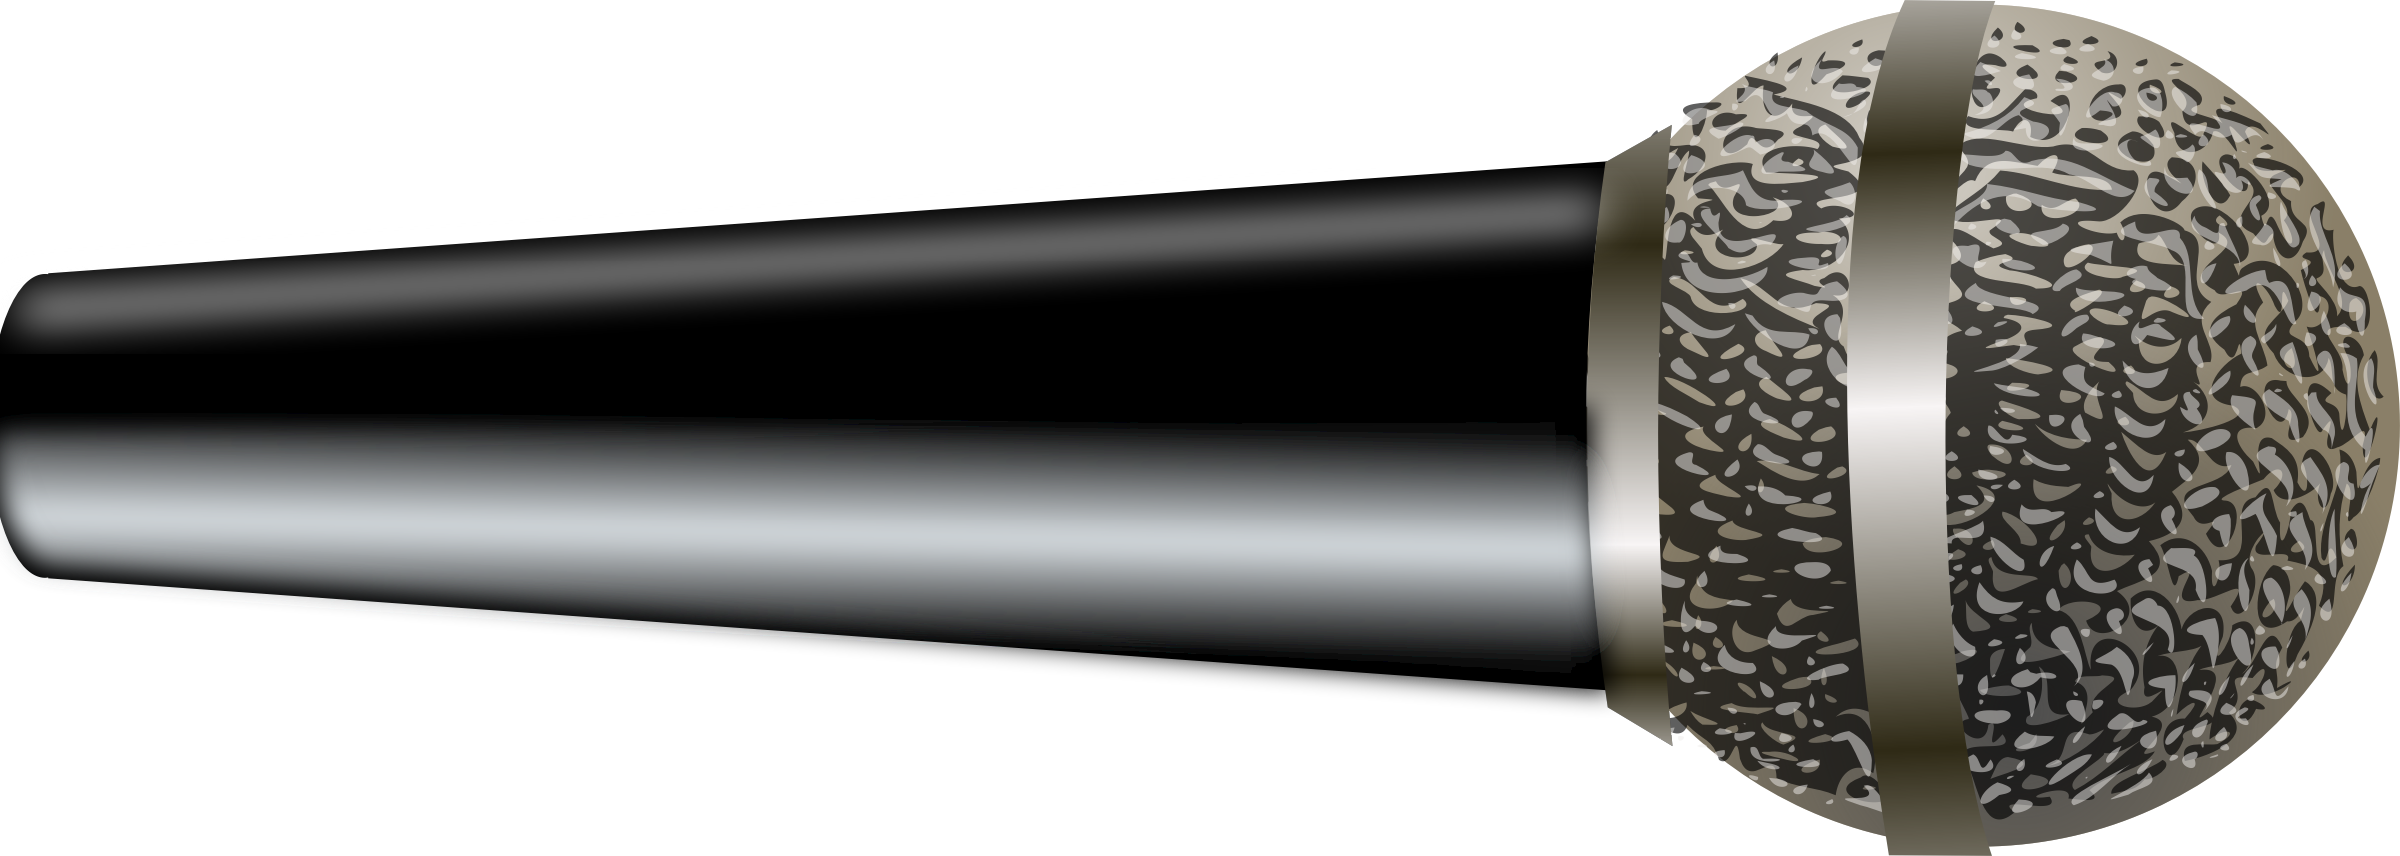 Microphone Lying on a Hard Surface PNG Image